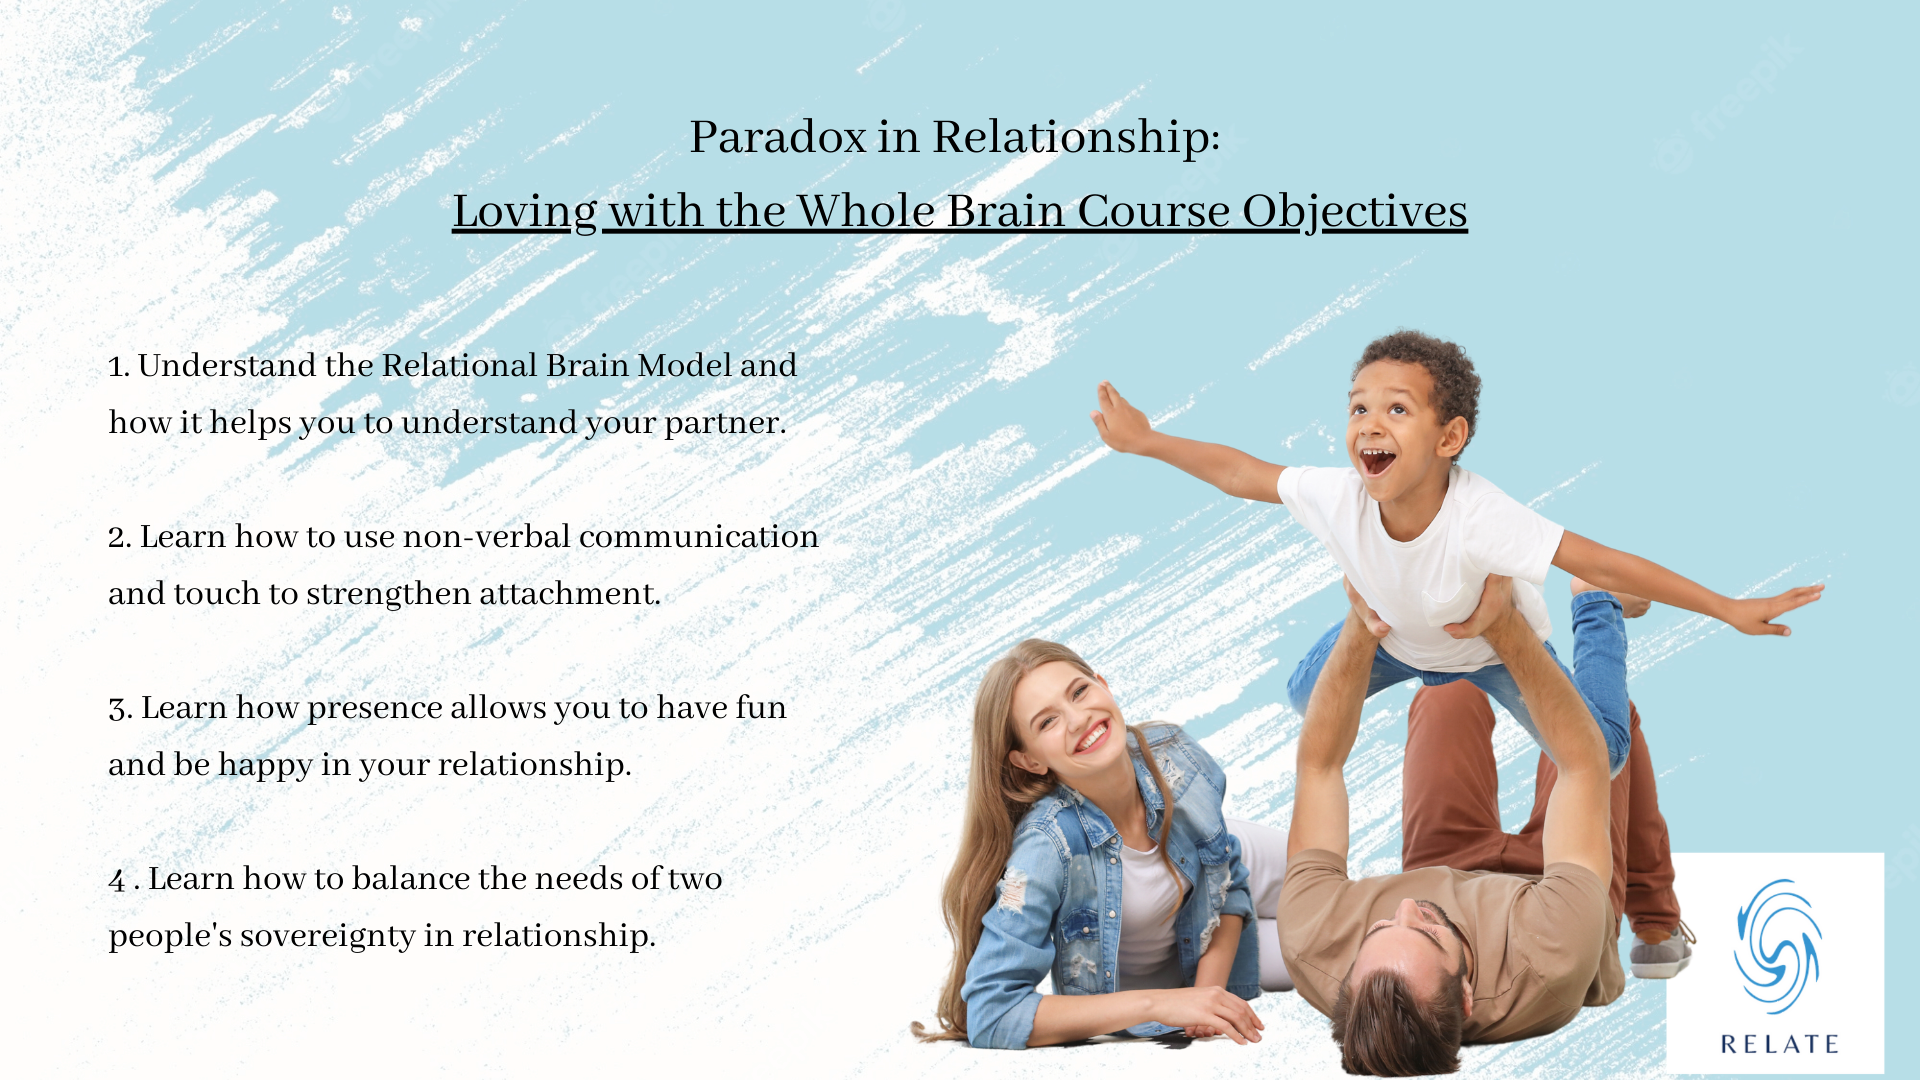 Paradox in Relationship: Loving with the Whole Brain